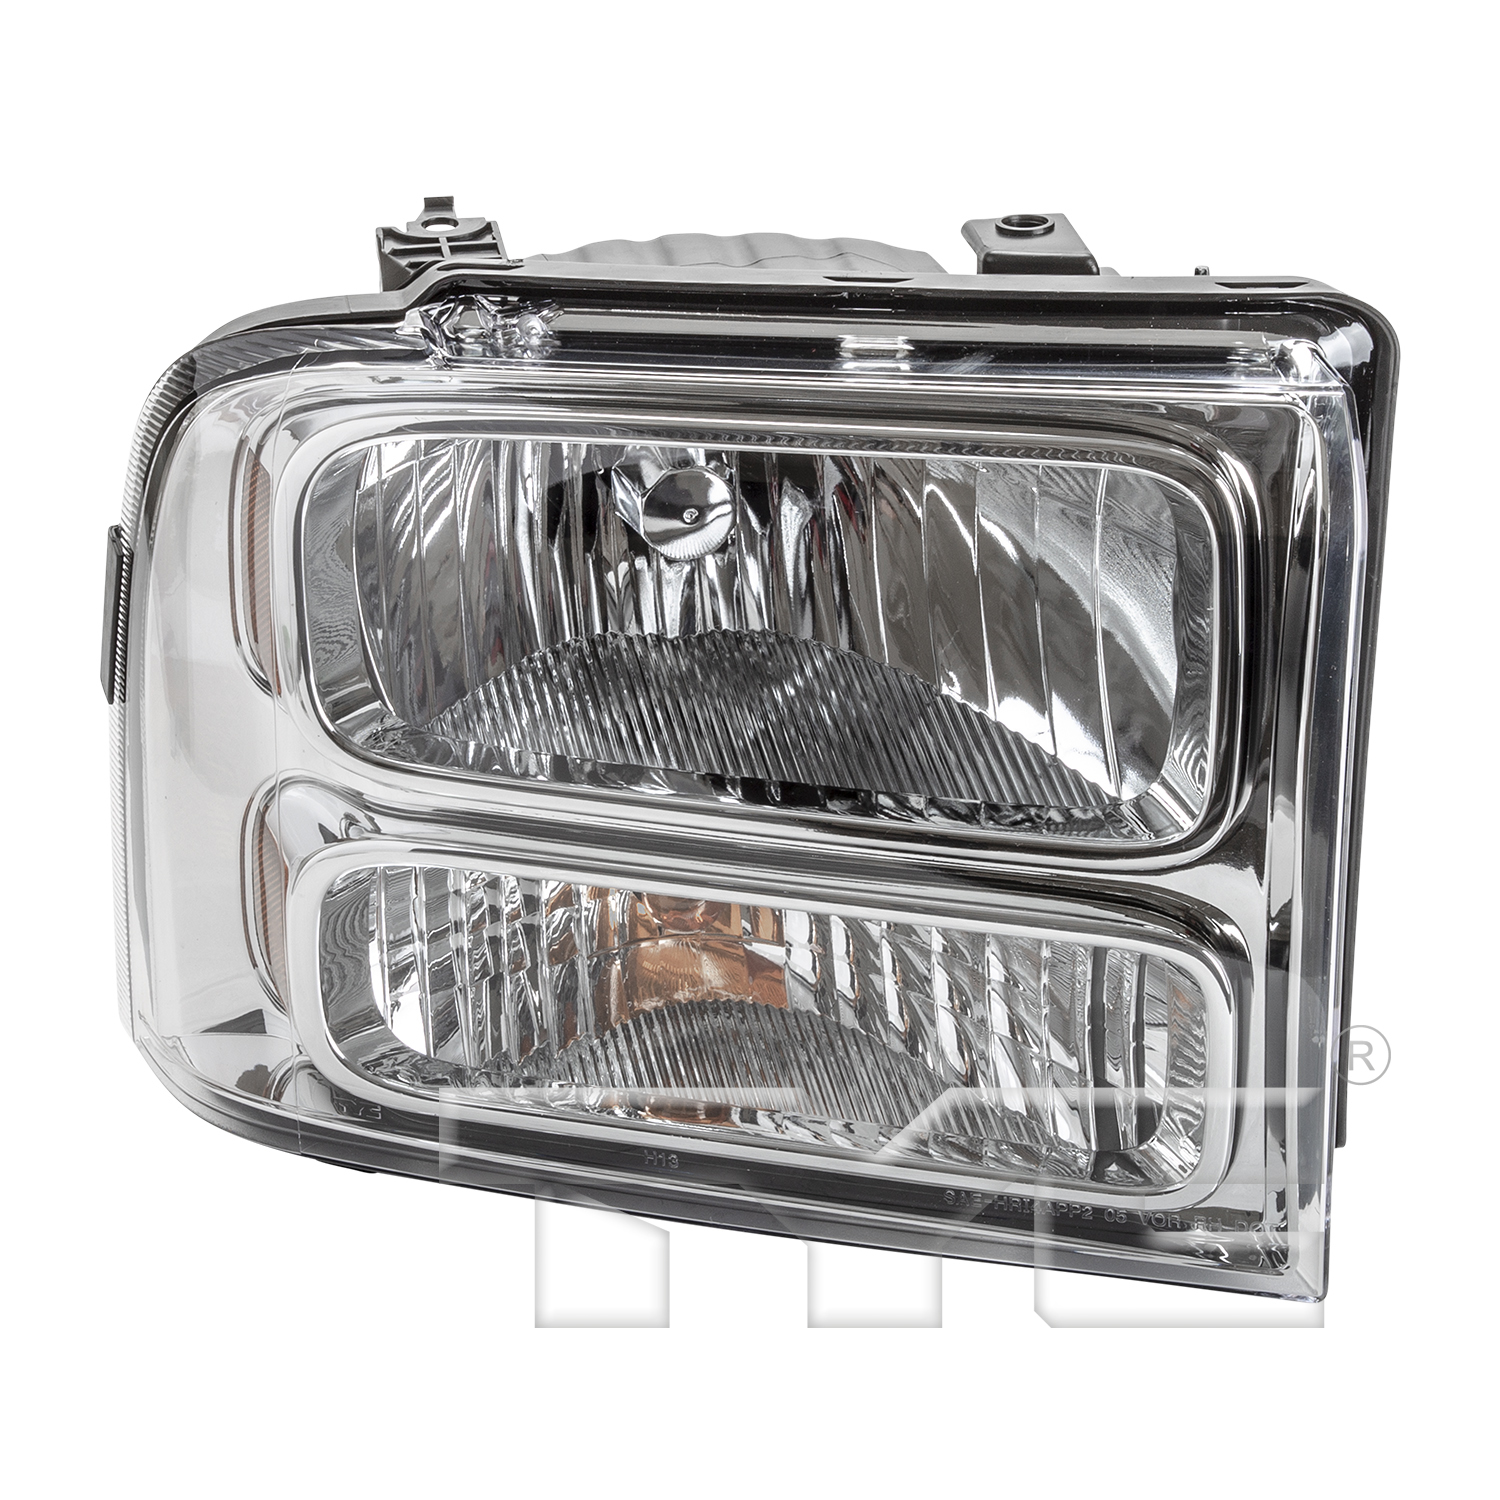 Aftermarket HEADLIGHTS for FORD - EXCURSION, EXCURSION,05-05,RT Headlamp assy composite